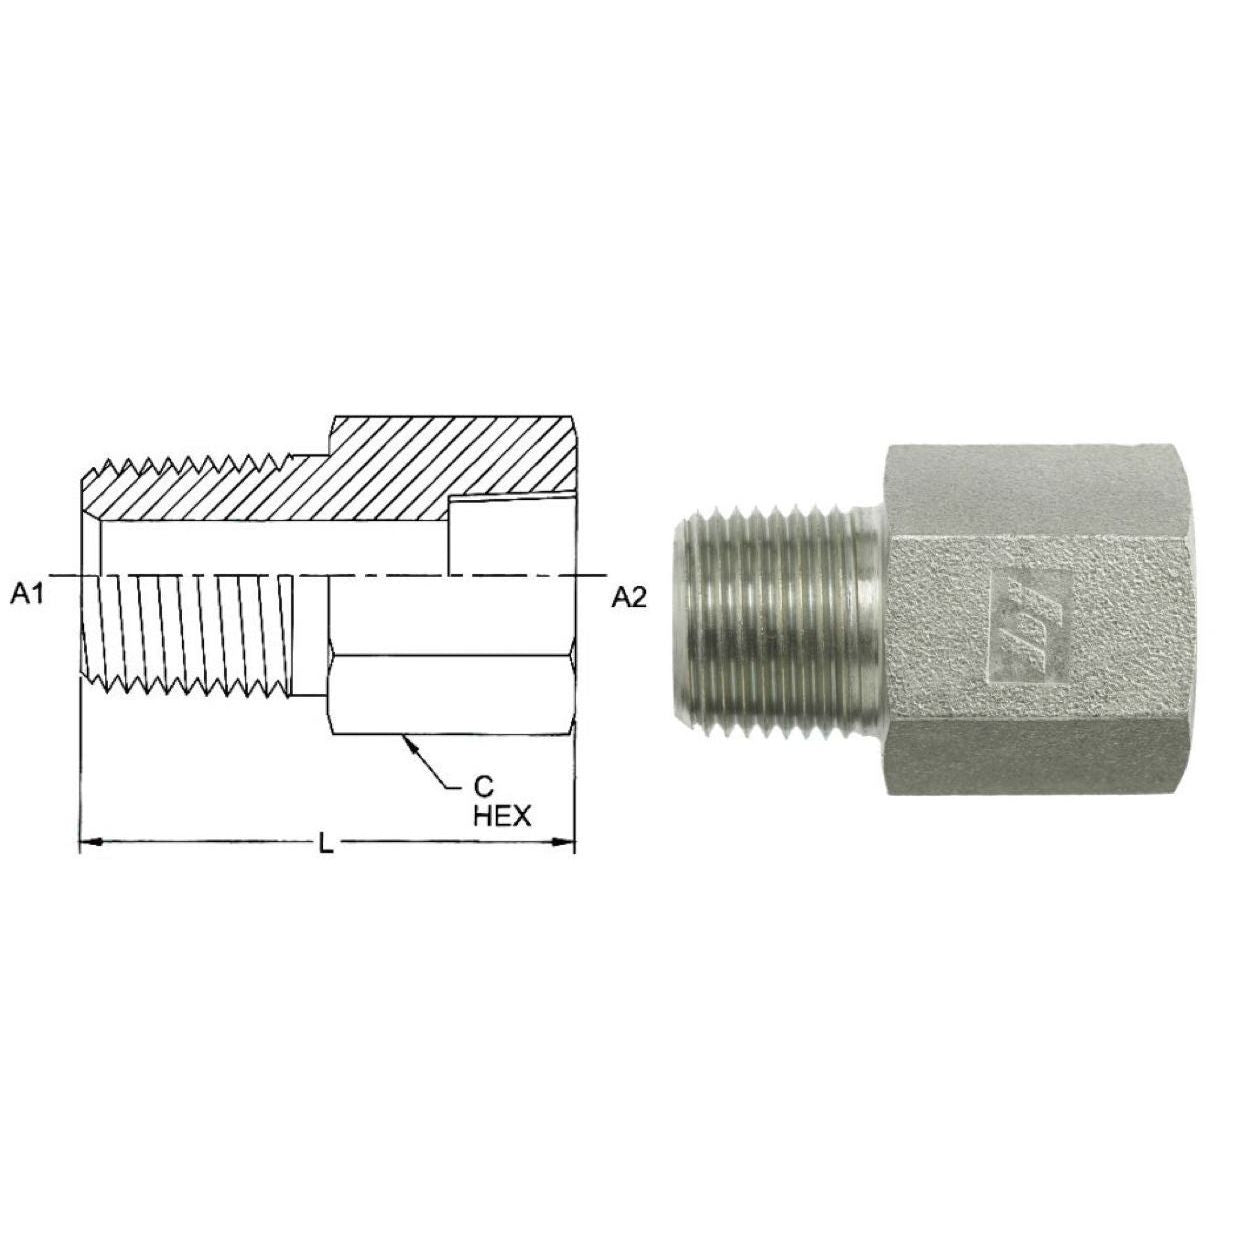 5405-04-06 : OneHydraulics Adapter, Straight Expander, 0.25 (1/4") Male NPT x 0.375 (3/8") Female, Steel, 6000psi